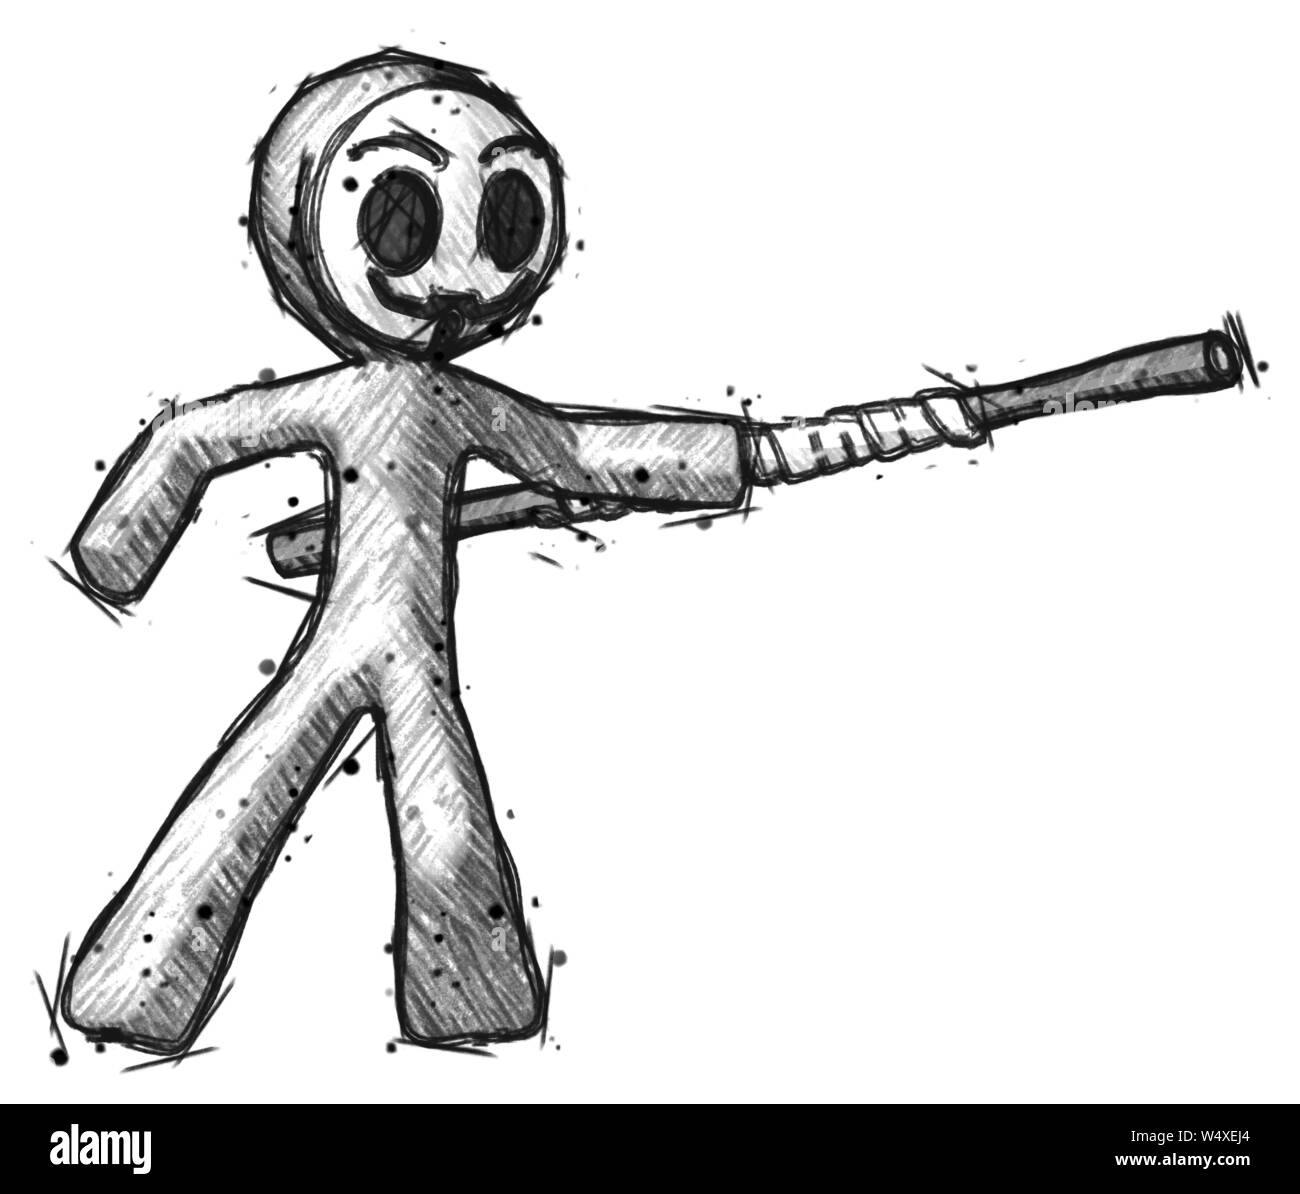 Sketch little anarchist hacker man bo staff pointing right kung fu pose. Stock Photo